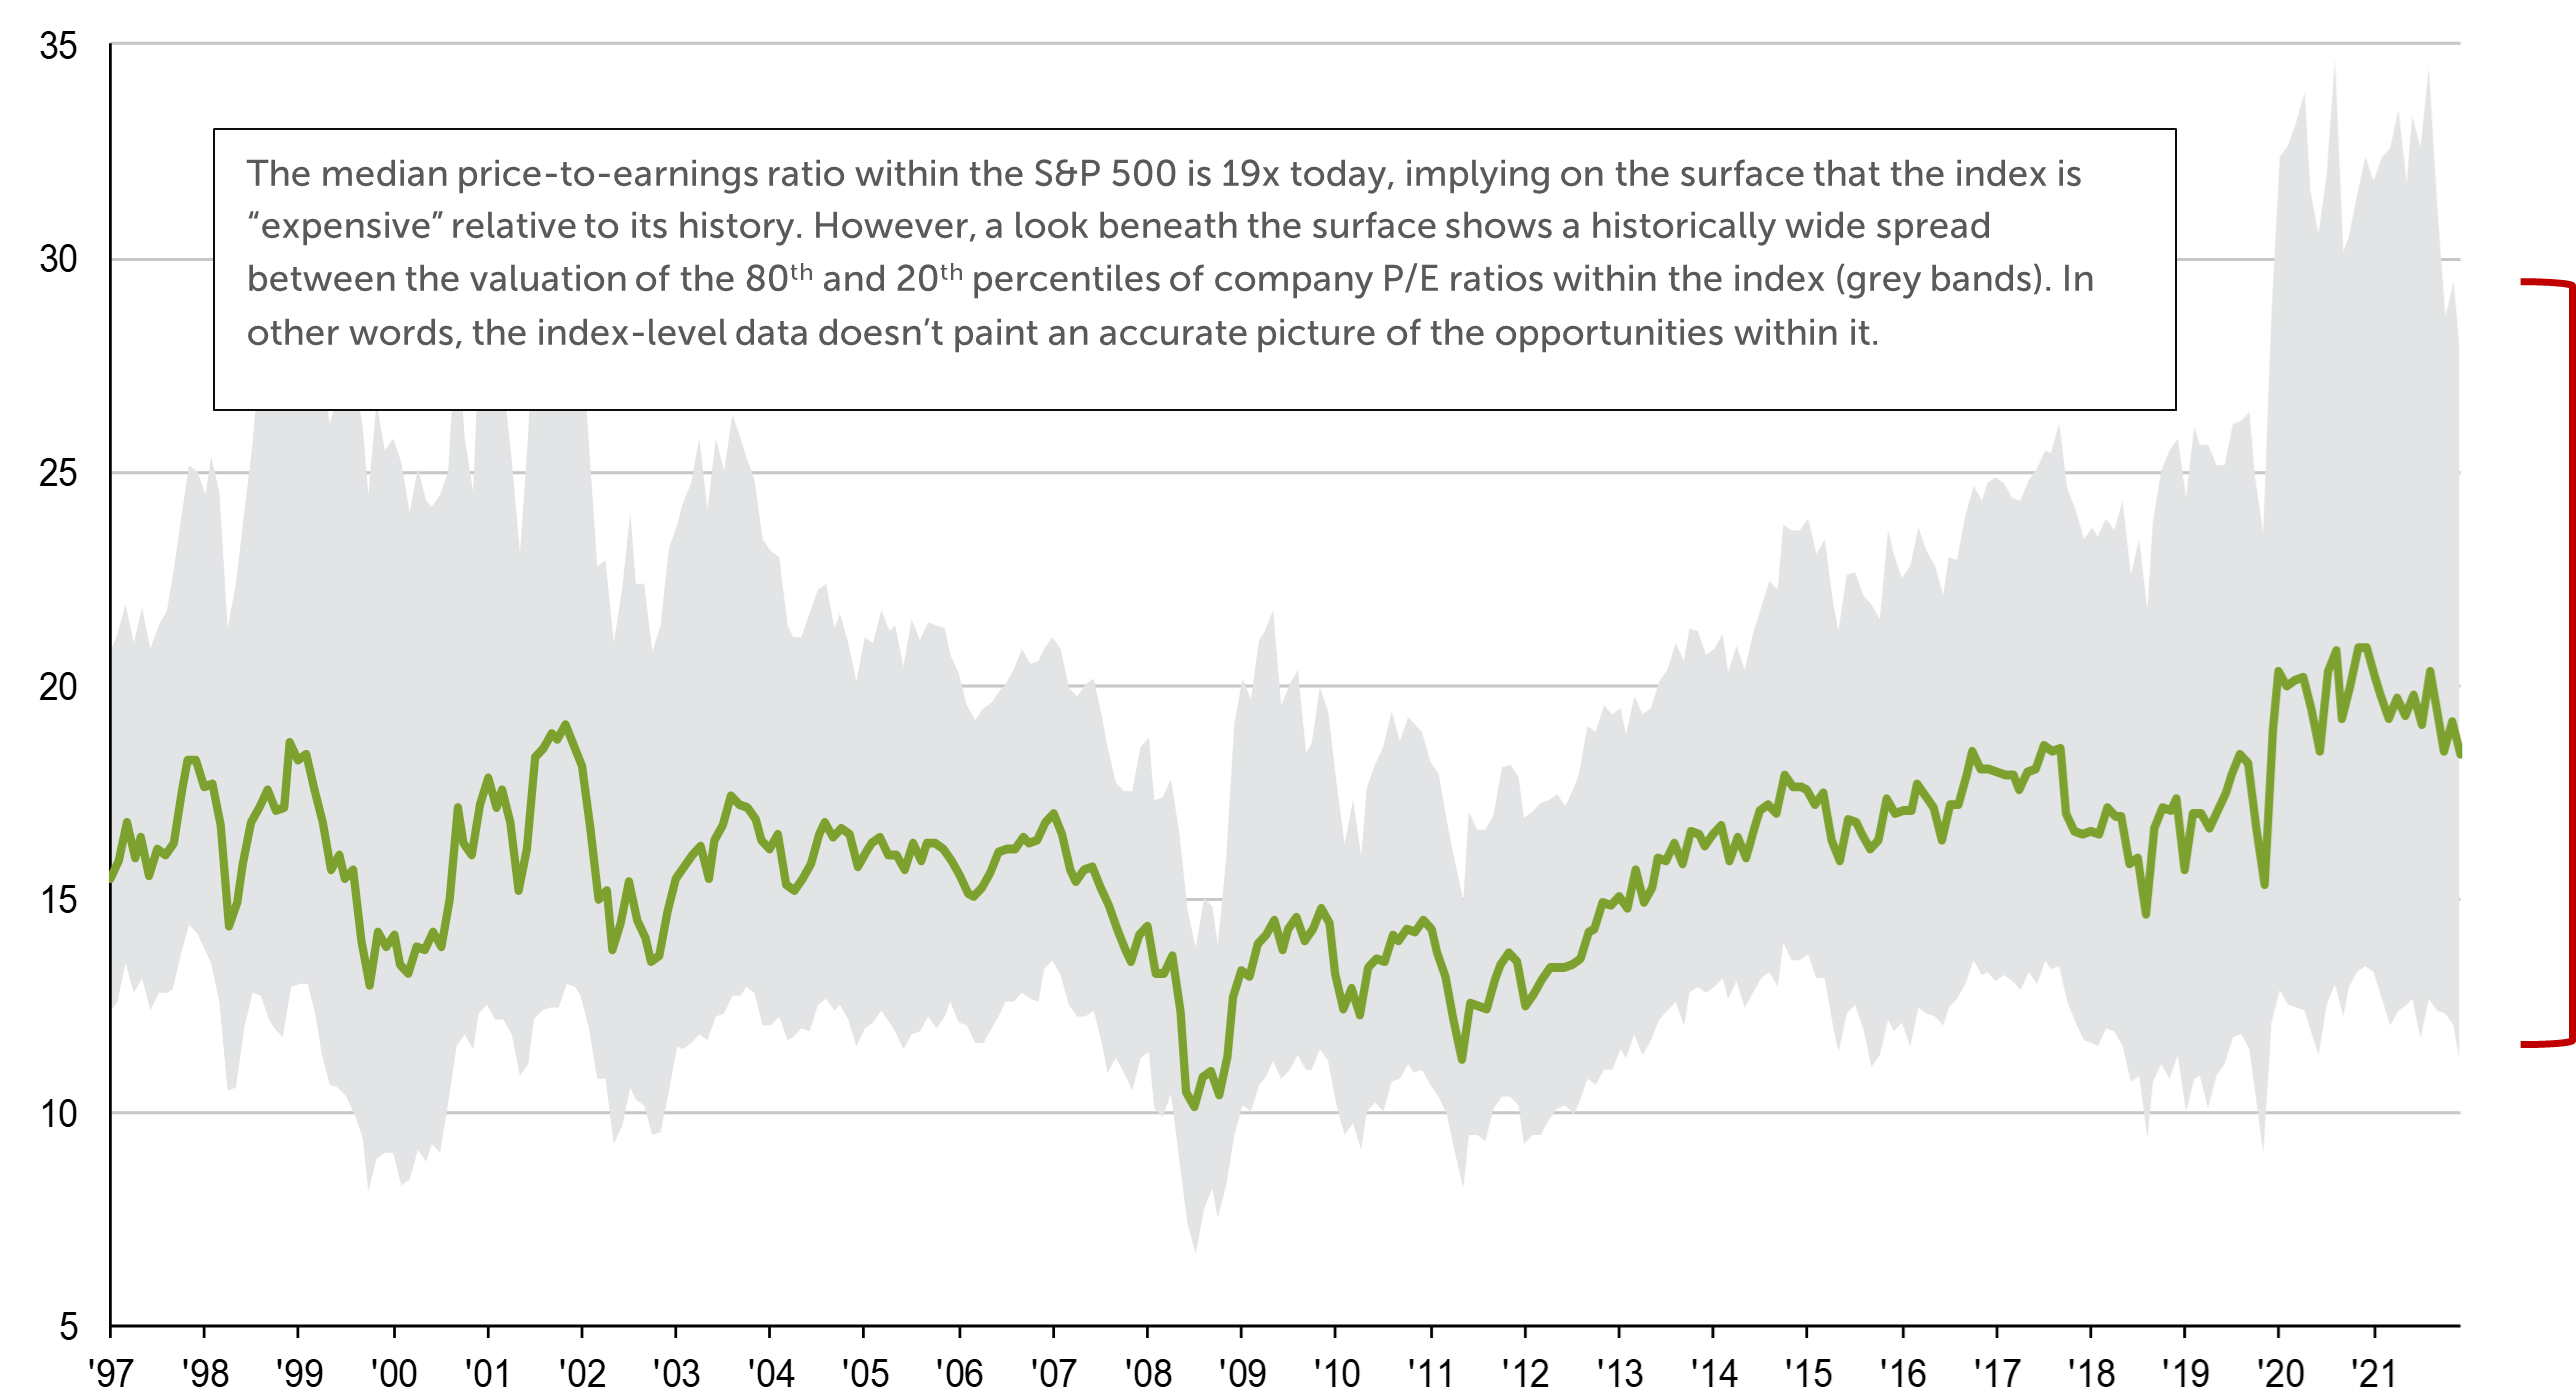 Line graph depicting median price-to-earnings ratio within the S&P 500